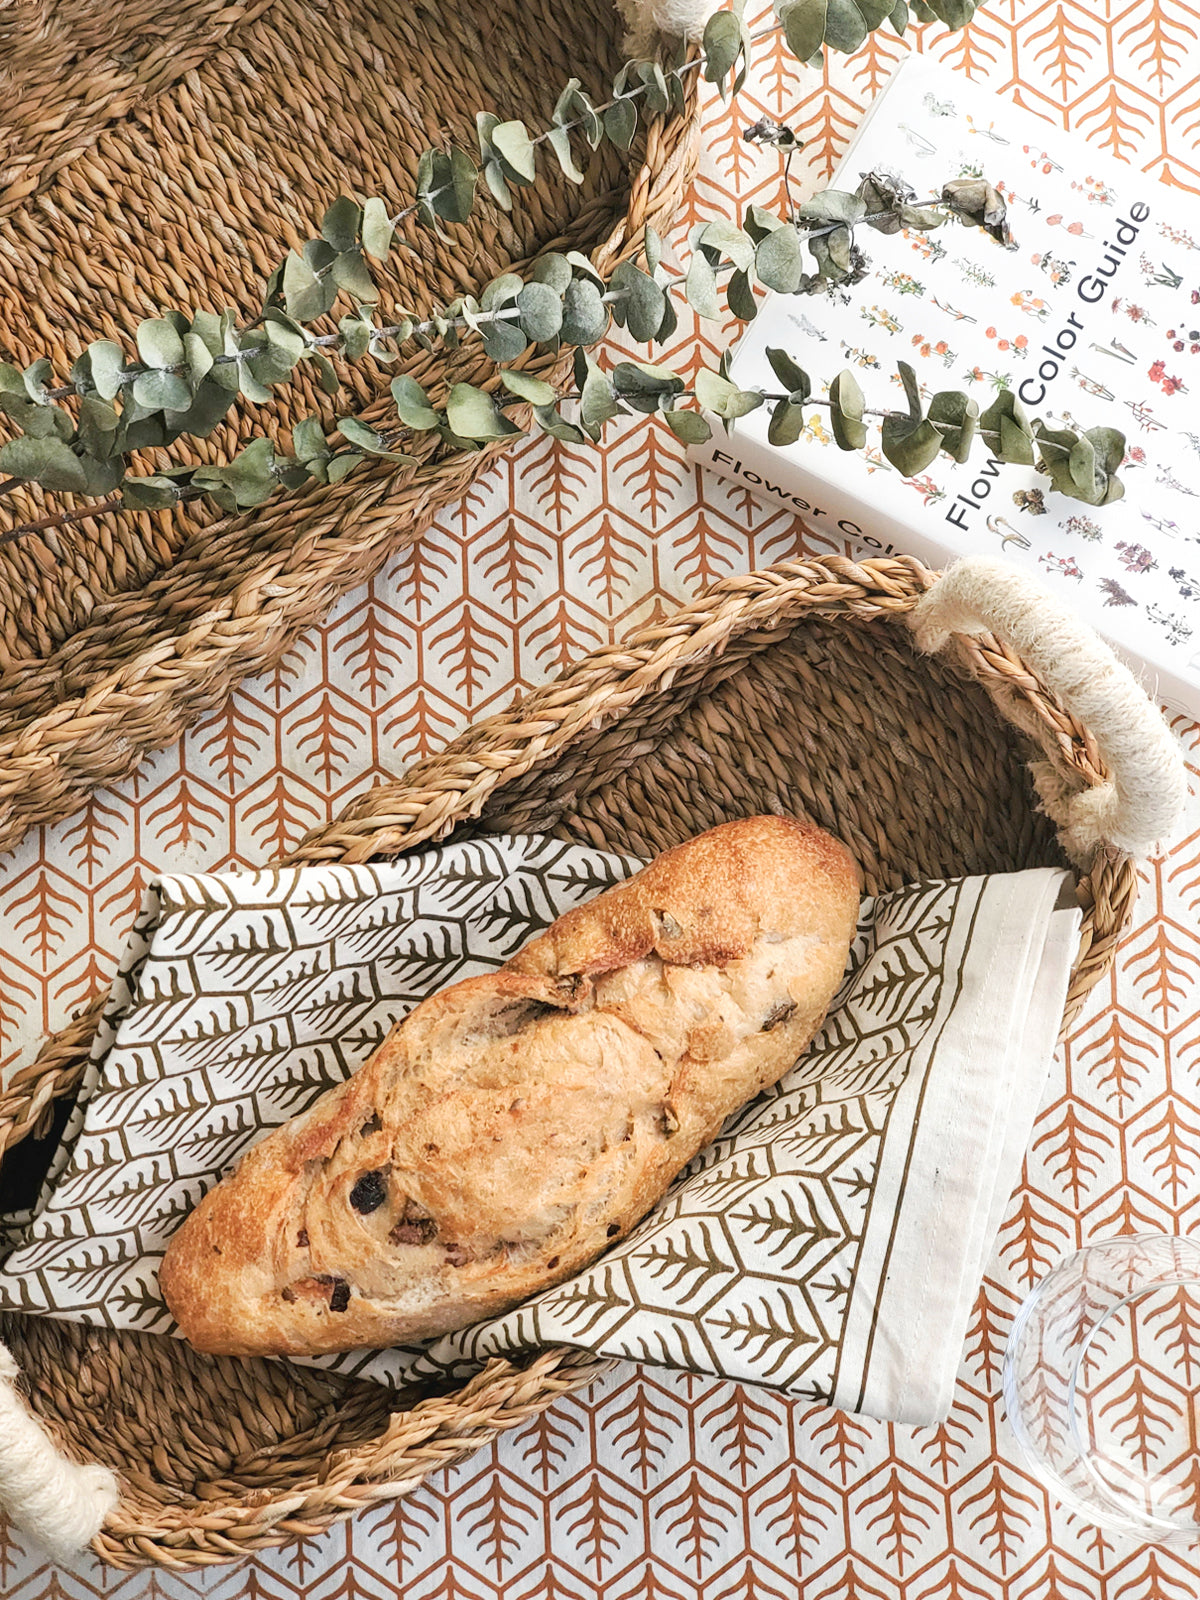 Printed tea towels styled with bread baskets and bread 